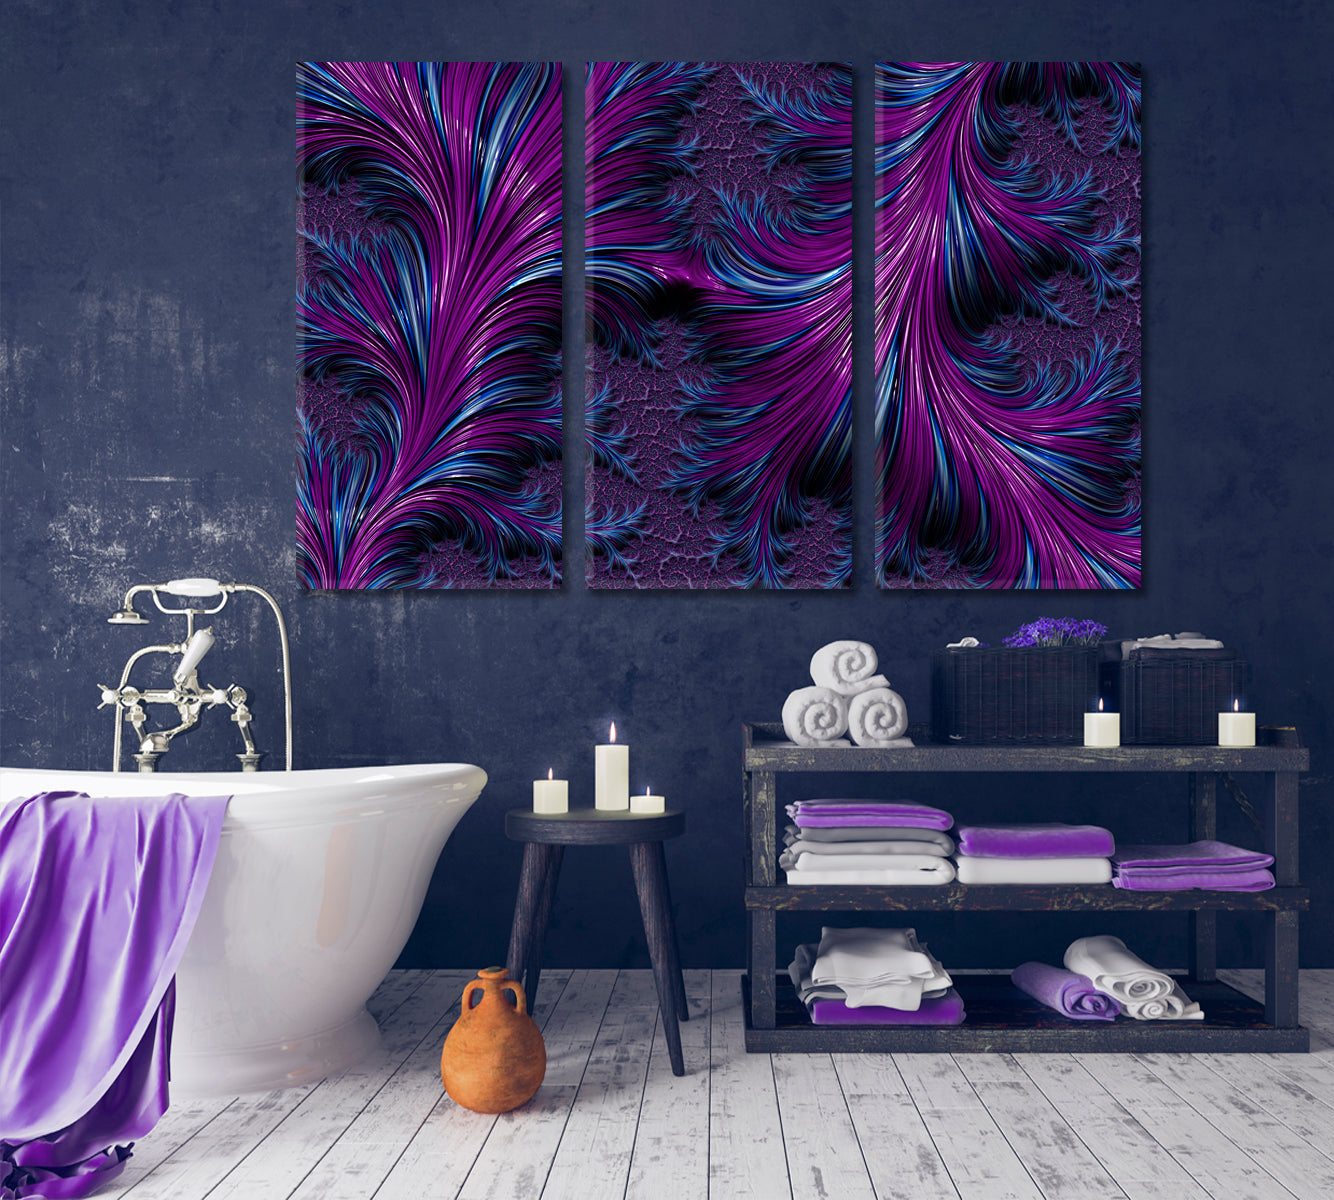 Abstract Fractal Spiral Swirls Purple and Navy Blue Feathers Canvas Print Contemporary Art Artesty 3 panels 36" x 24" 